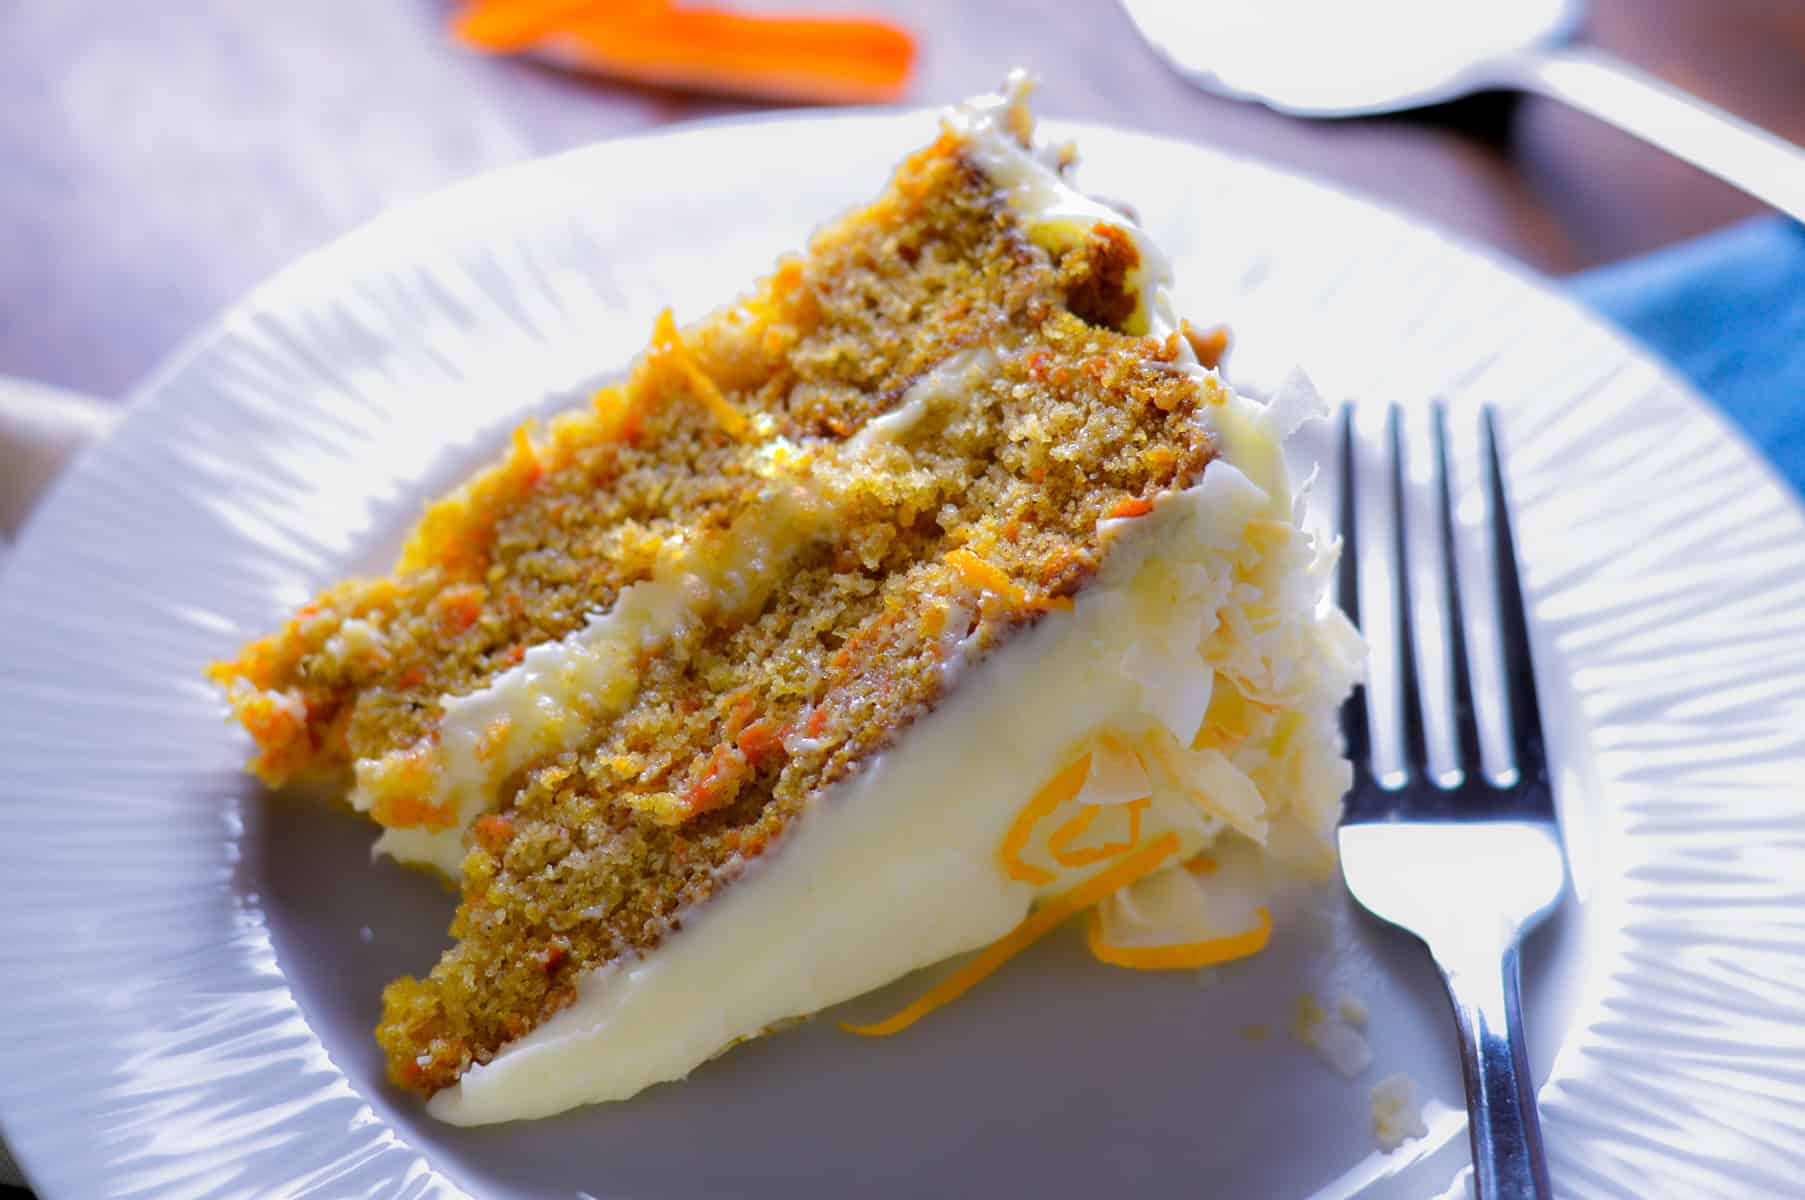 Slice of Orange Carrot Cake on plate laying down on white plate with fork on right